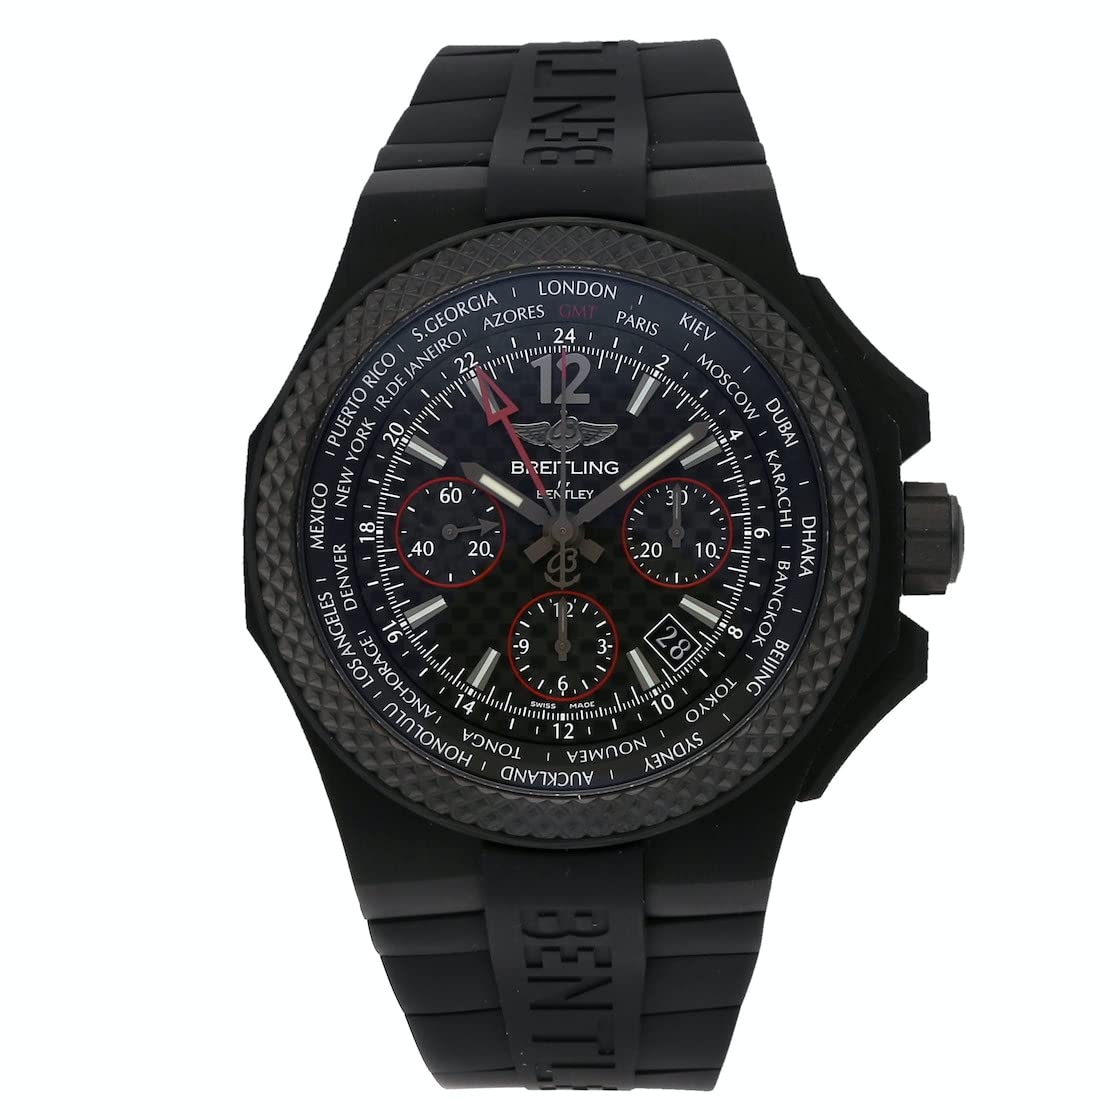 Breitling Bentley Mechanical(Automatic) Black Dial Watch NB0434E5/BE94 (Pre-Owned)